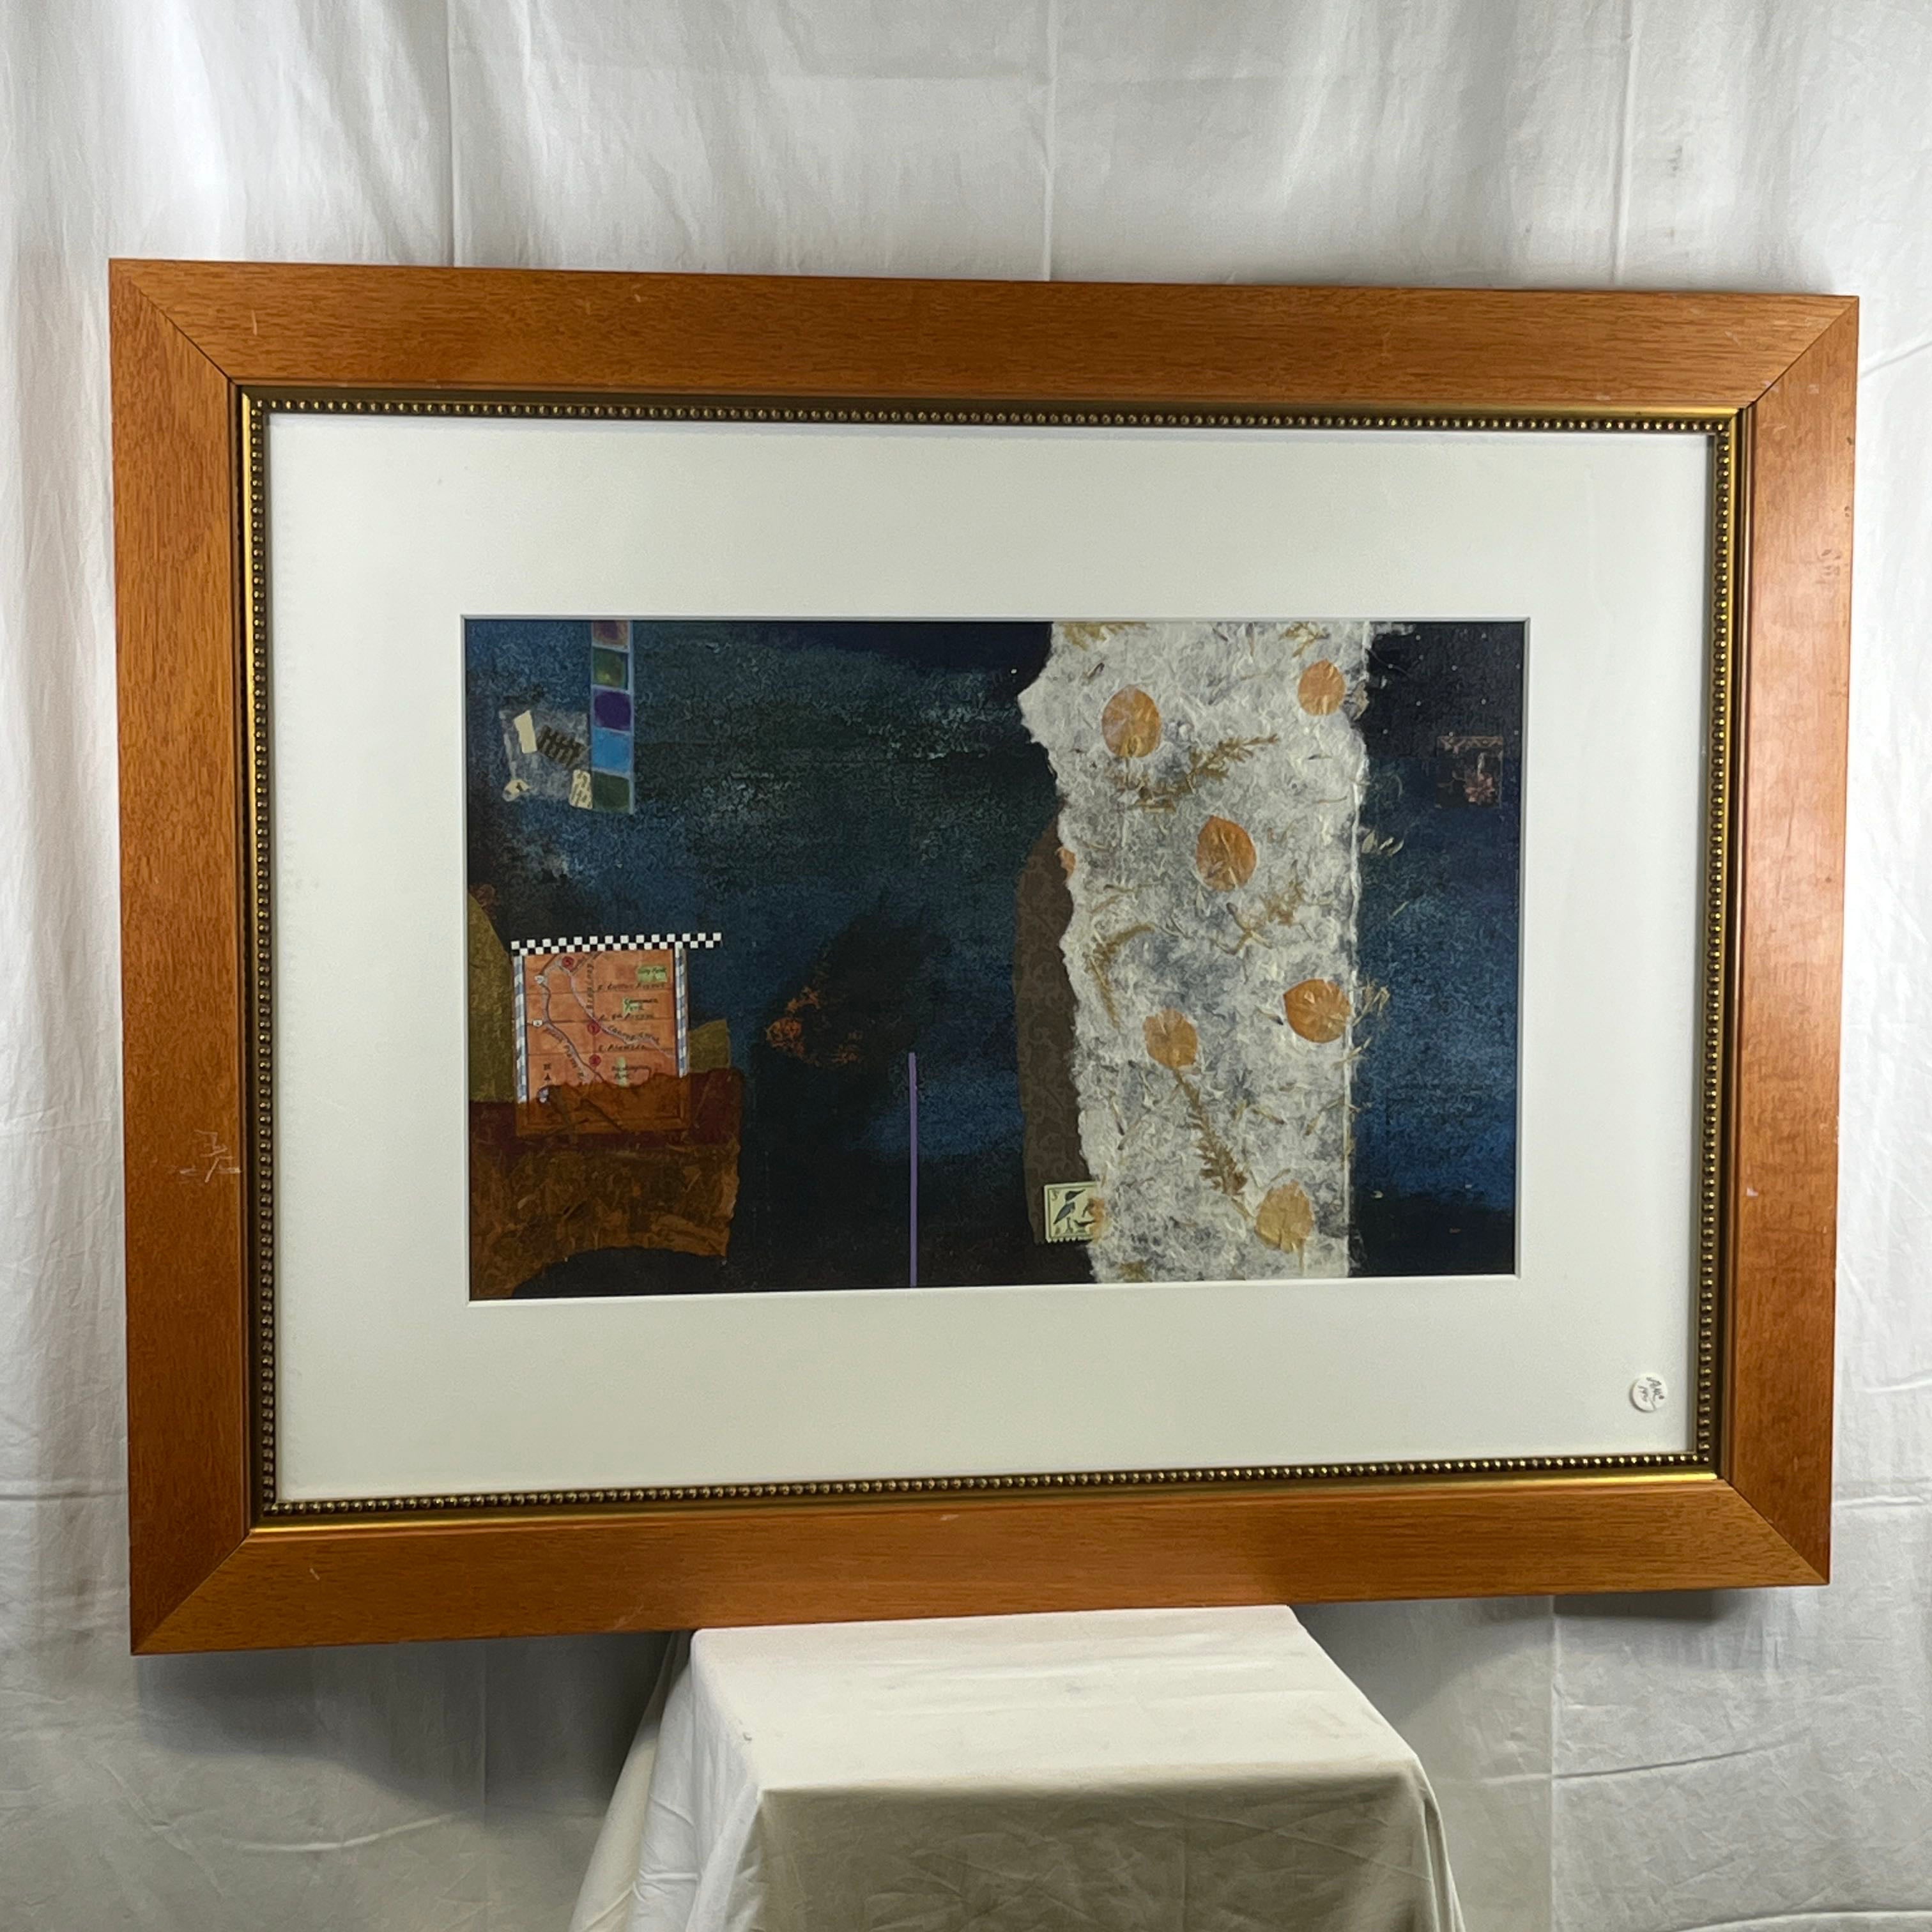 Abstract Colfax Framed Mixed Media by Unkown Artist Wall Decor